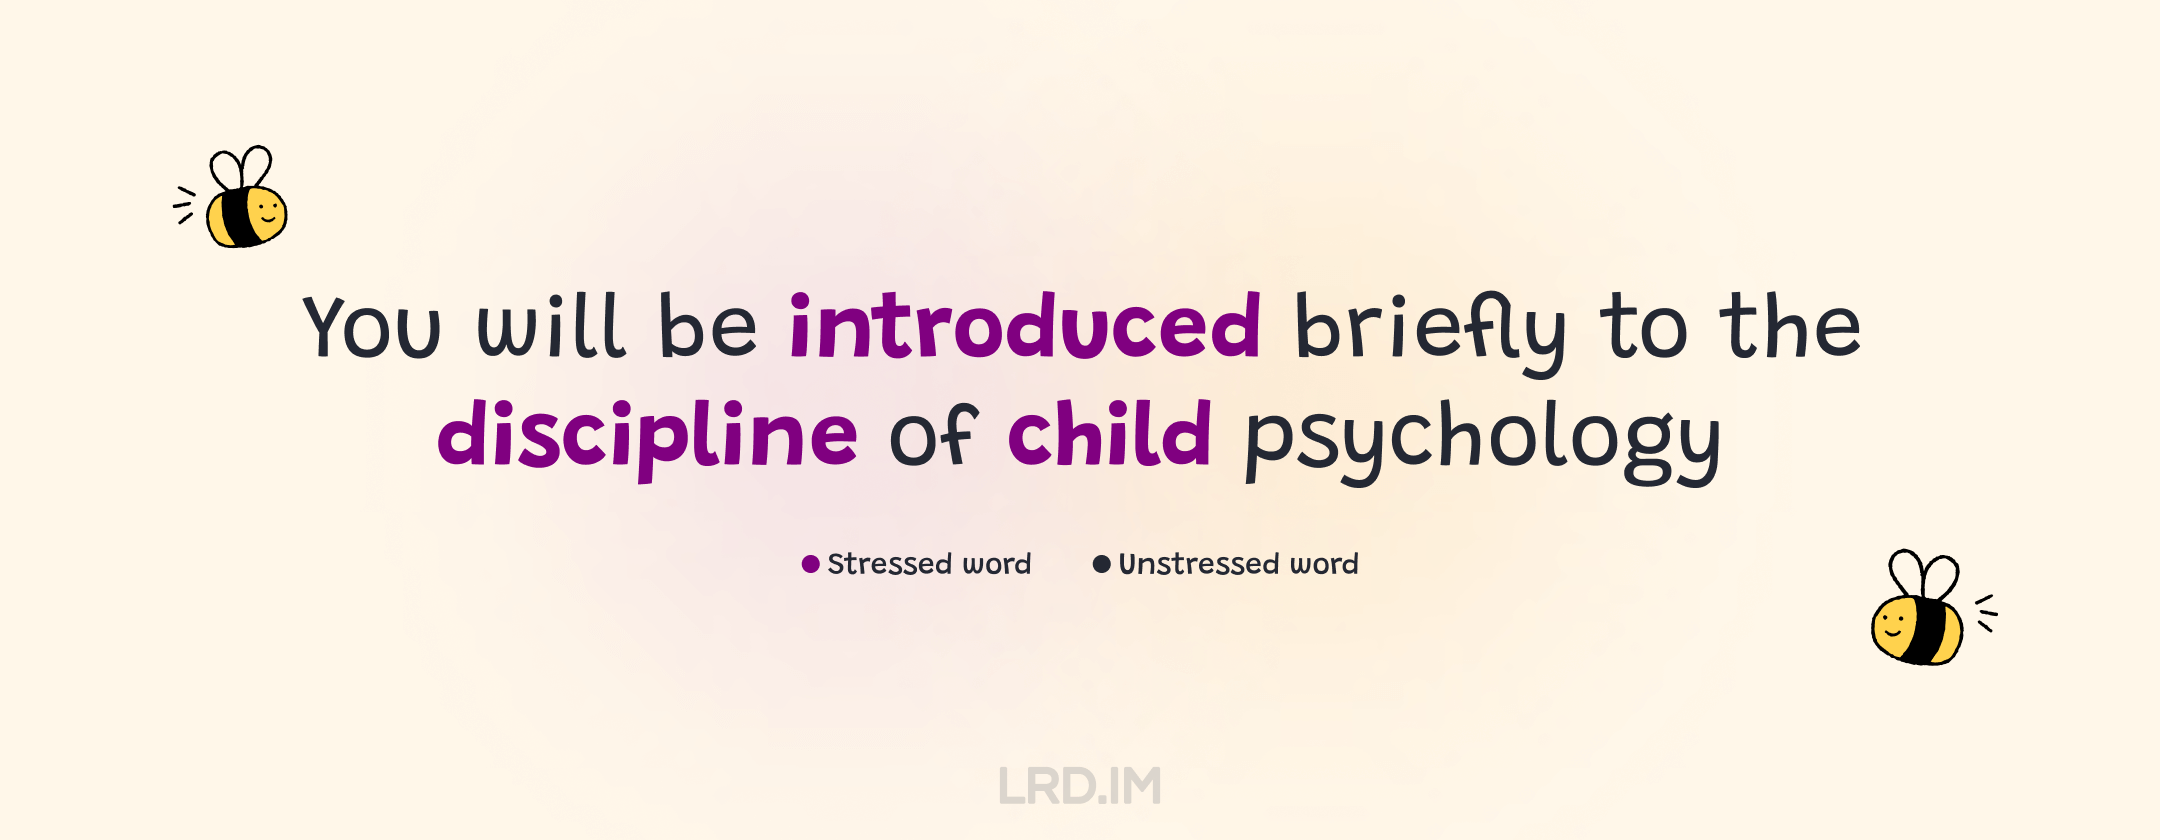 In the sentence "You will be introduced briefly to the discipline of child psychology," the stressed words are "introduced," "discipline," and "child."